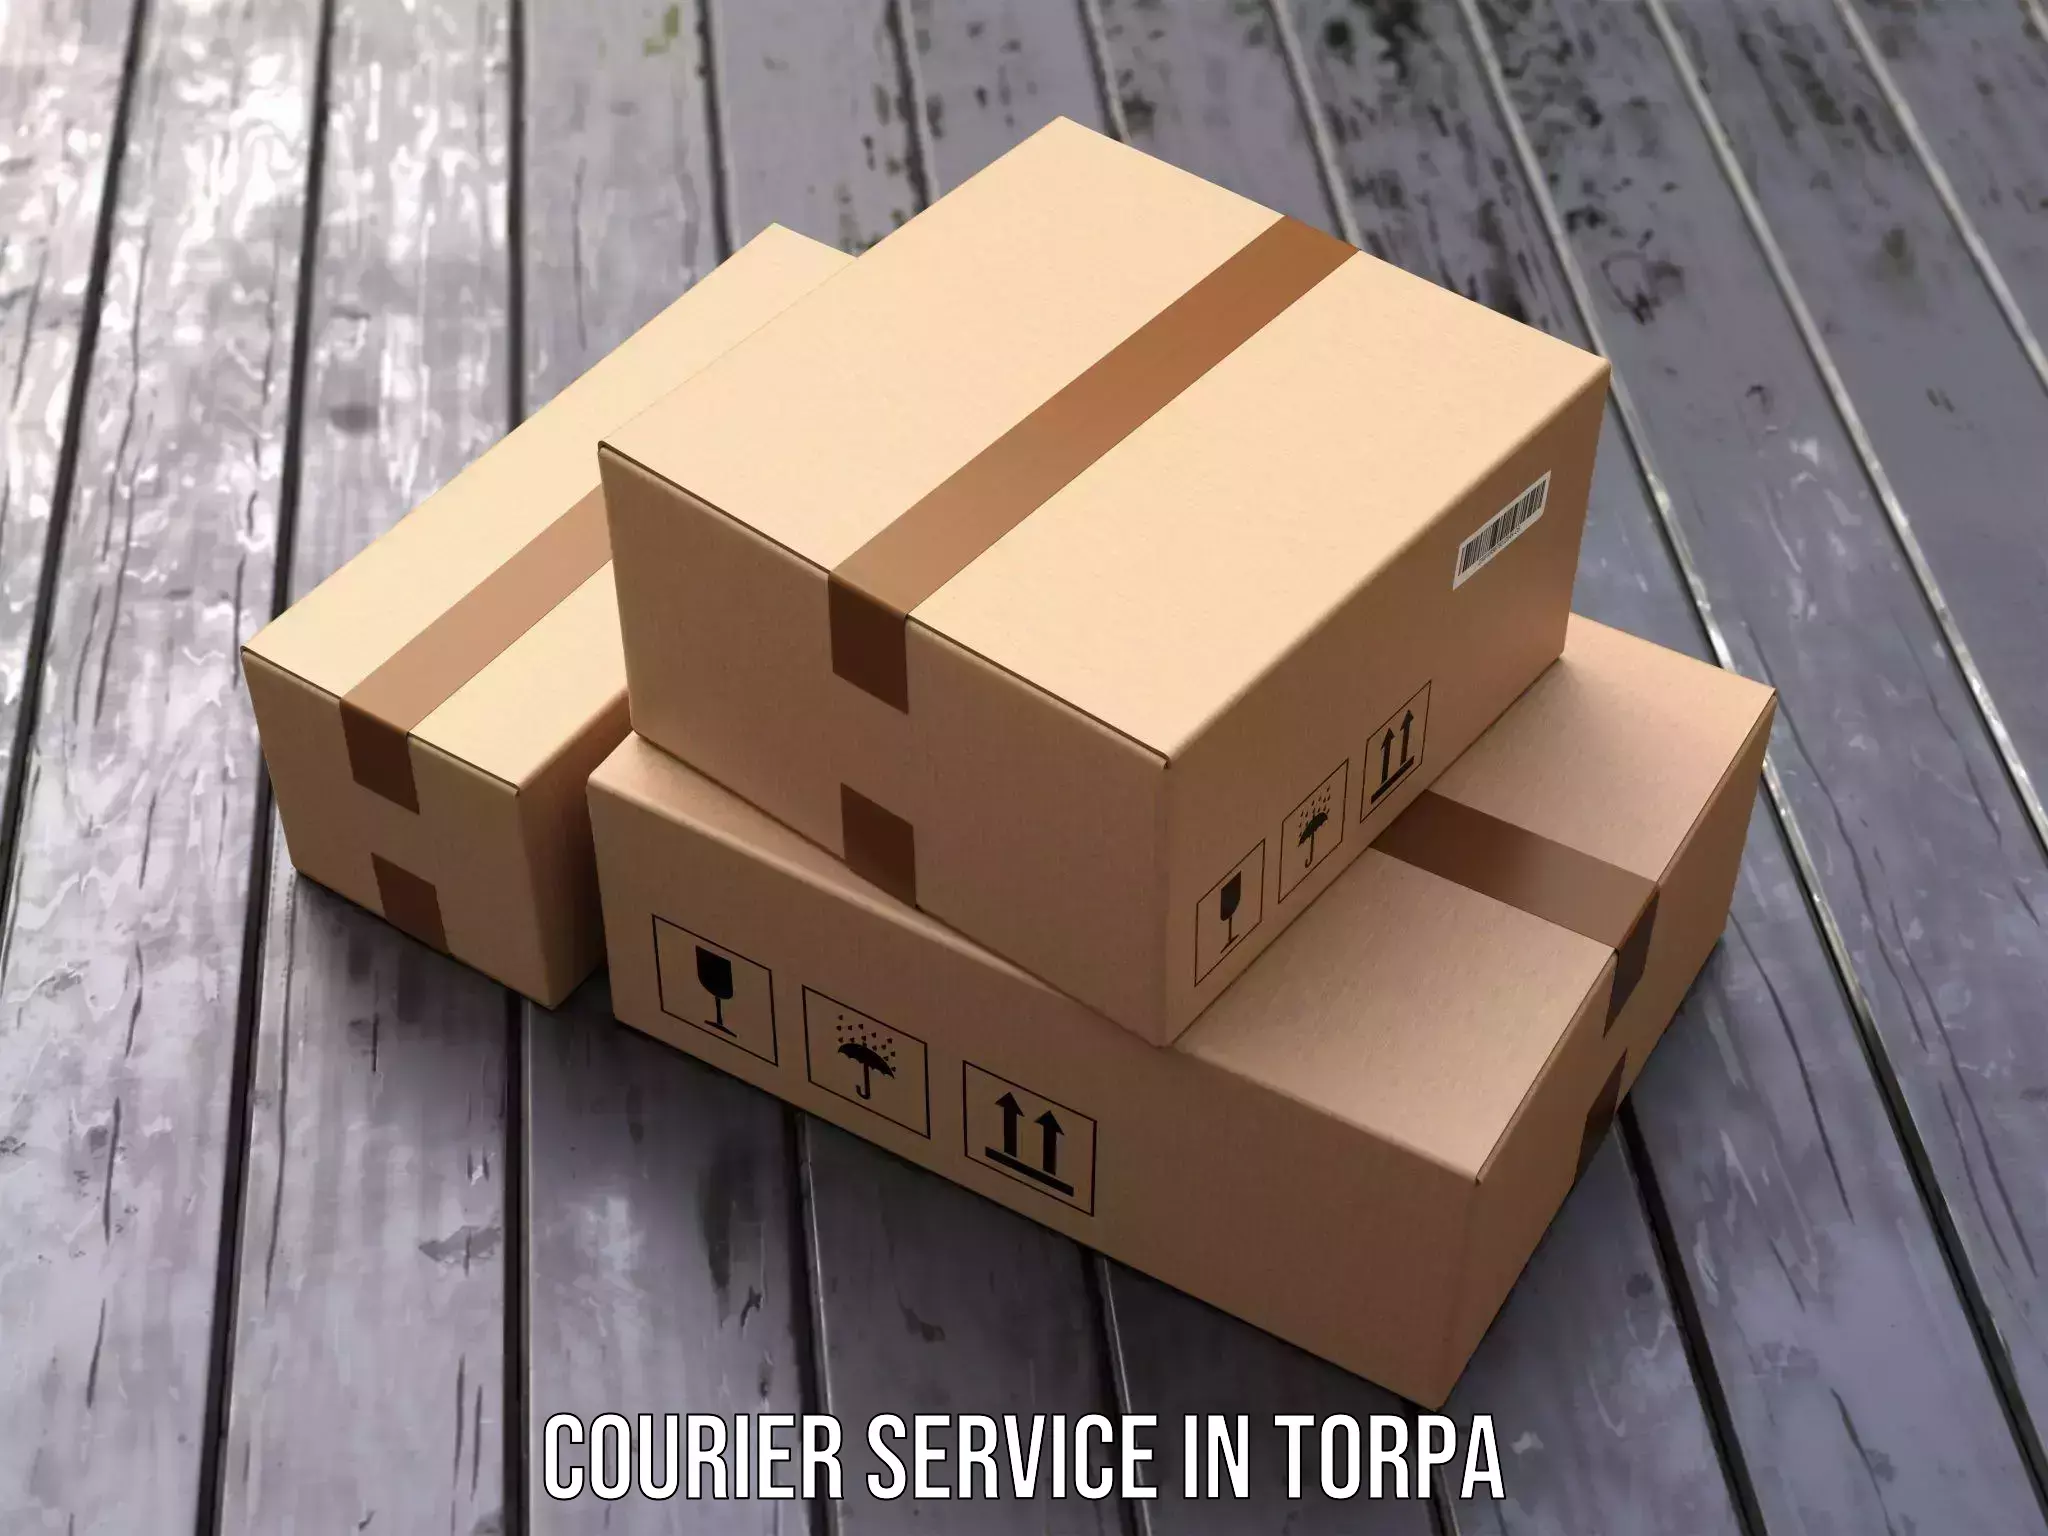 Emergency parcel delivery in Torpa